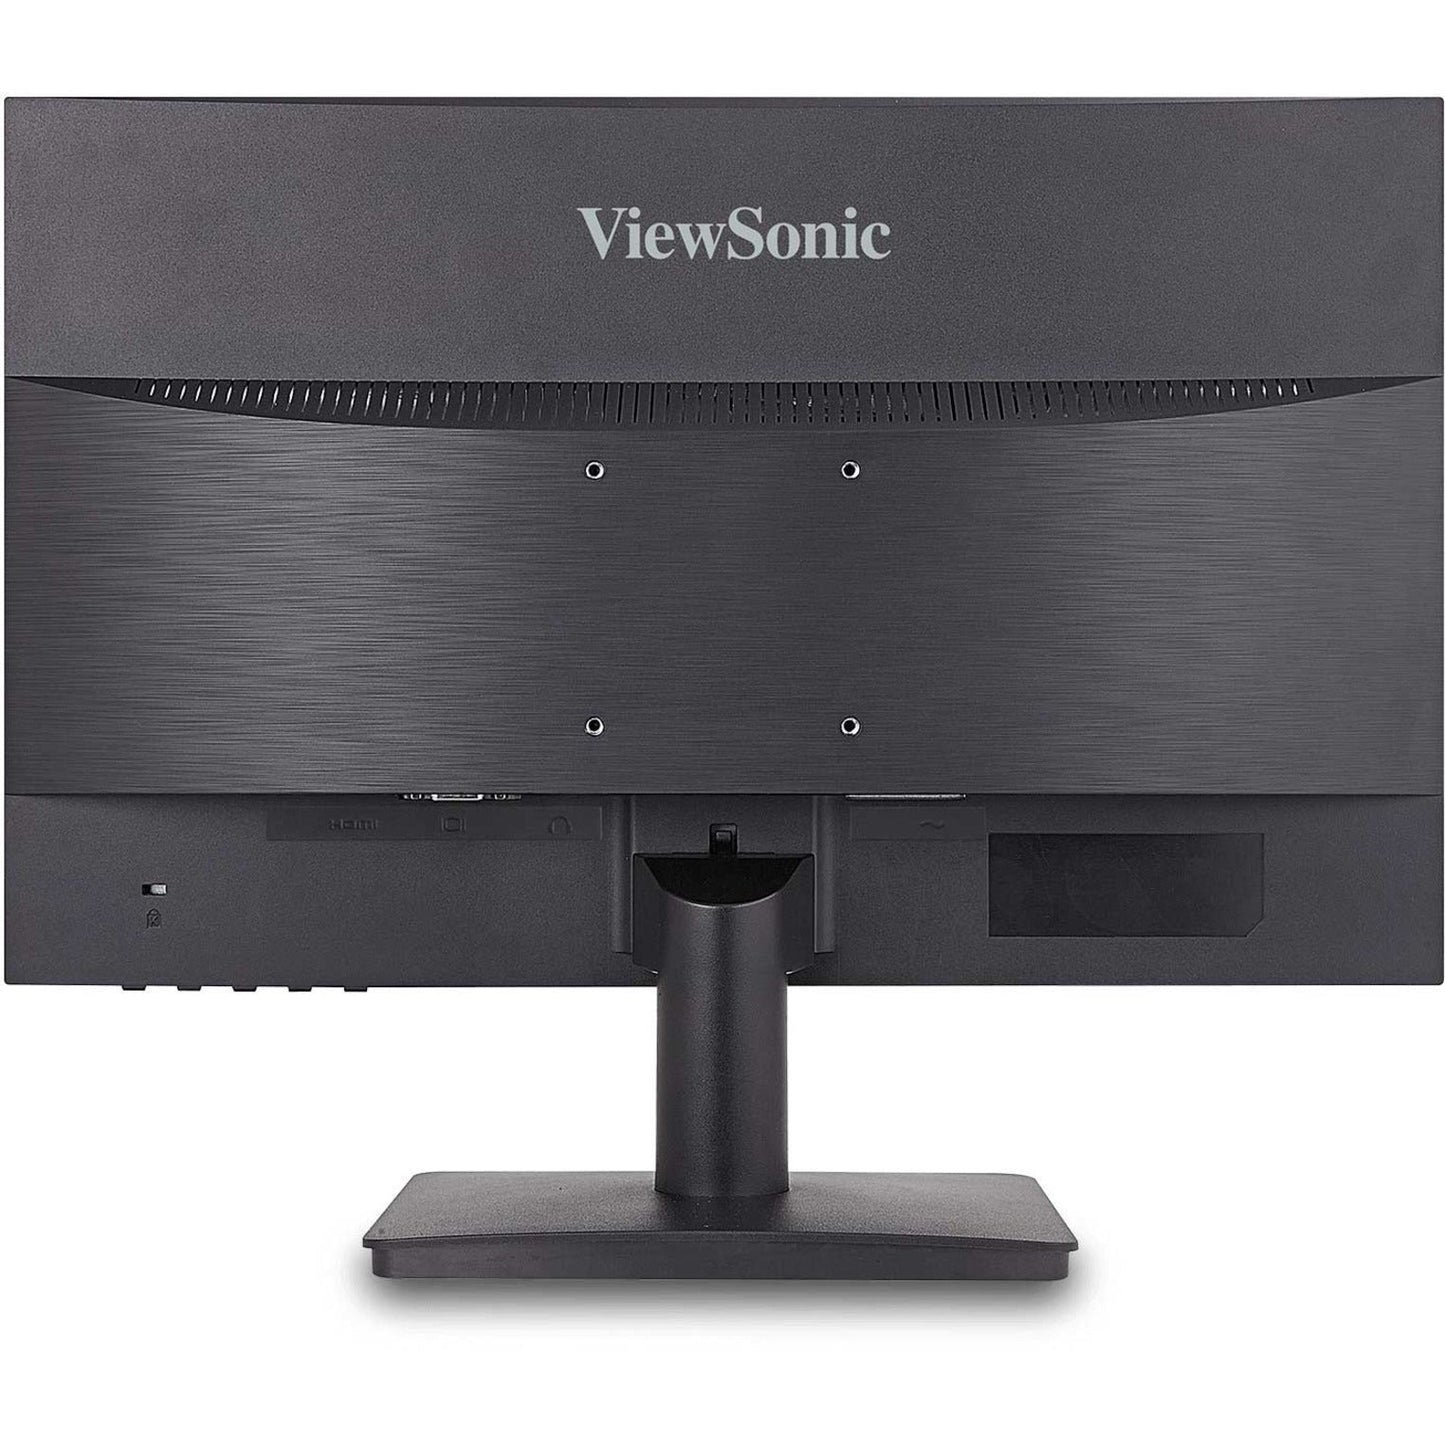 ViewSonic VA1903H 19-Inch WXGA 1366x768p 16:9 Widescreen Monitor with Enhanced View Comfort Custom ViewModes and HDMI for Home and Office